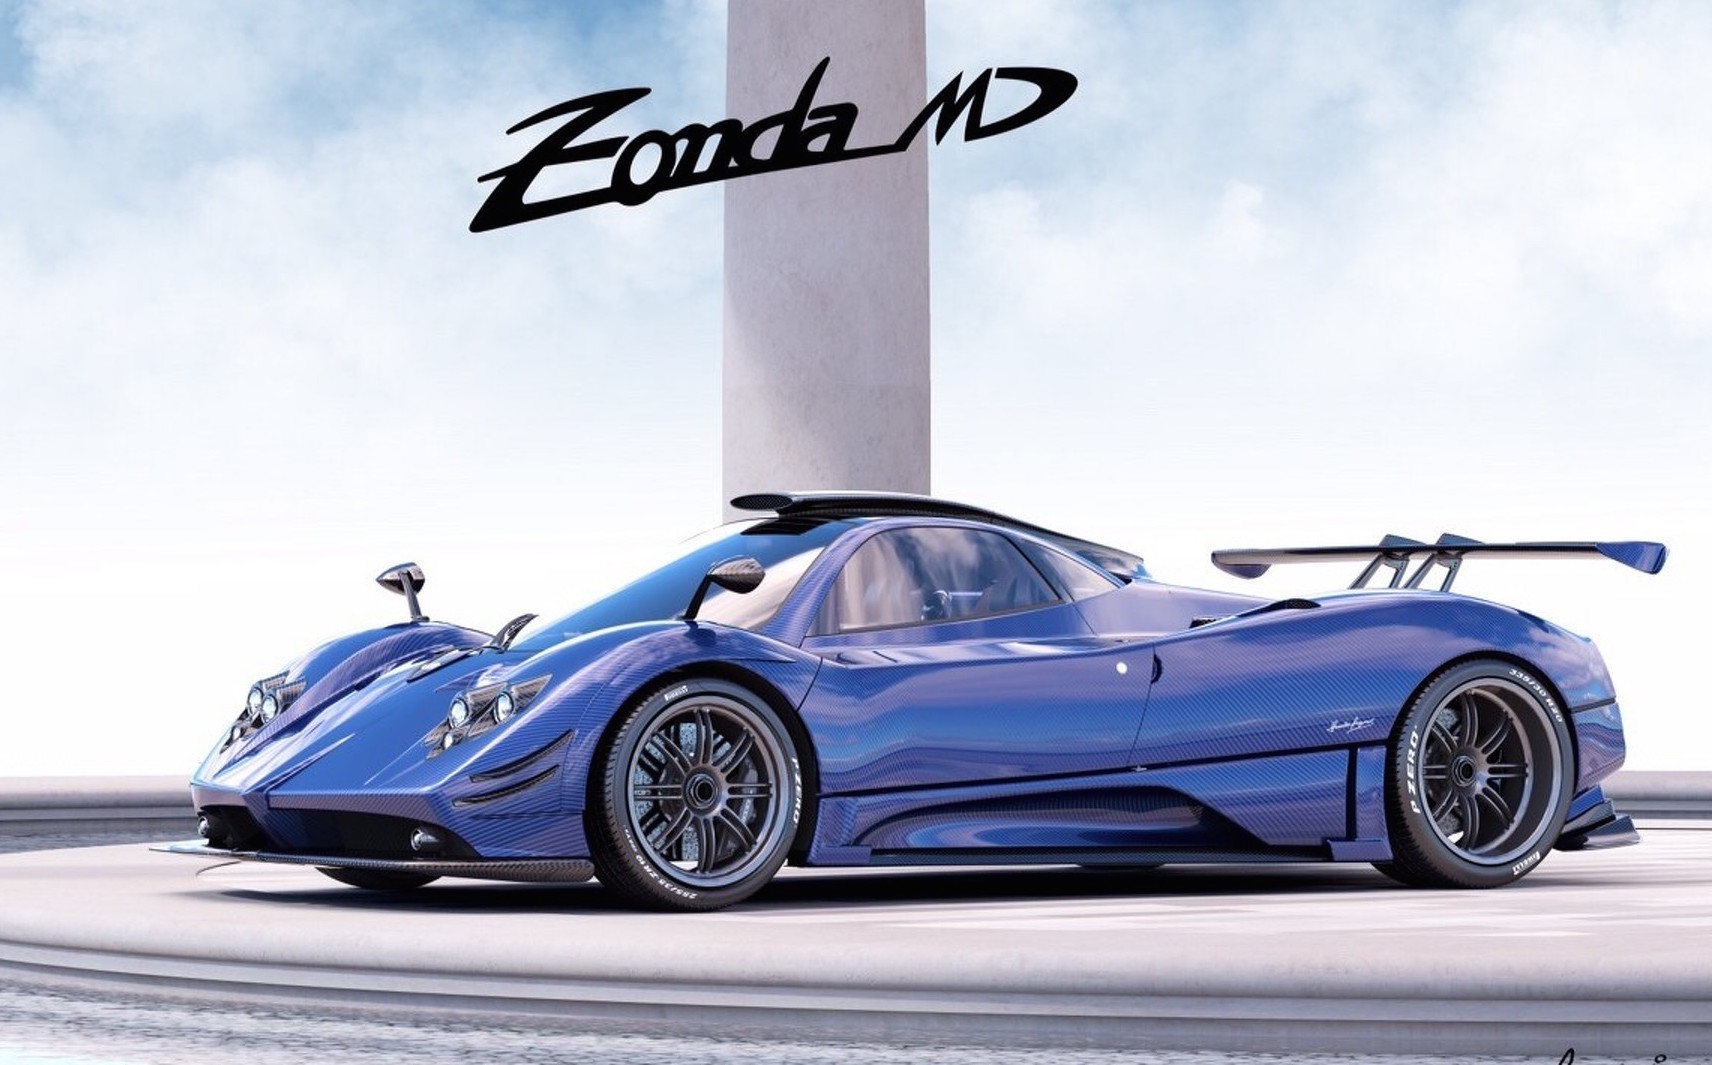 Yet another Pagani Zonda one-off special made; the MD